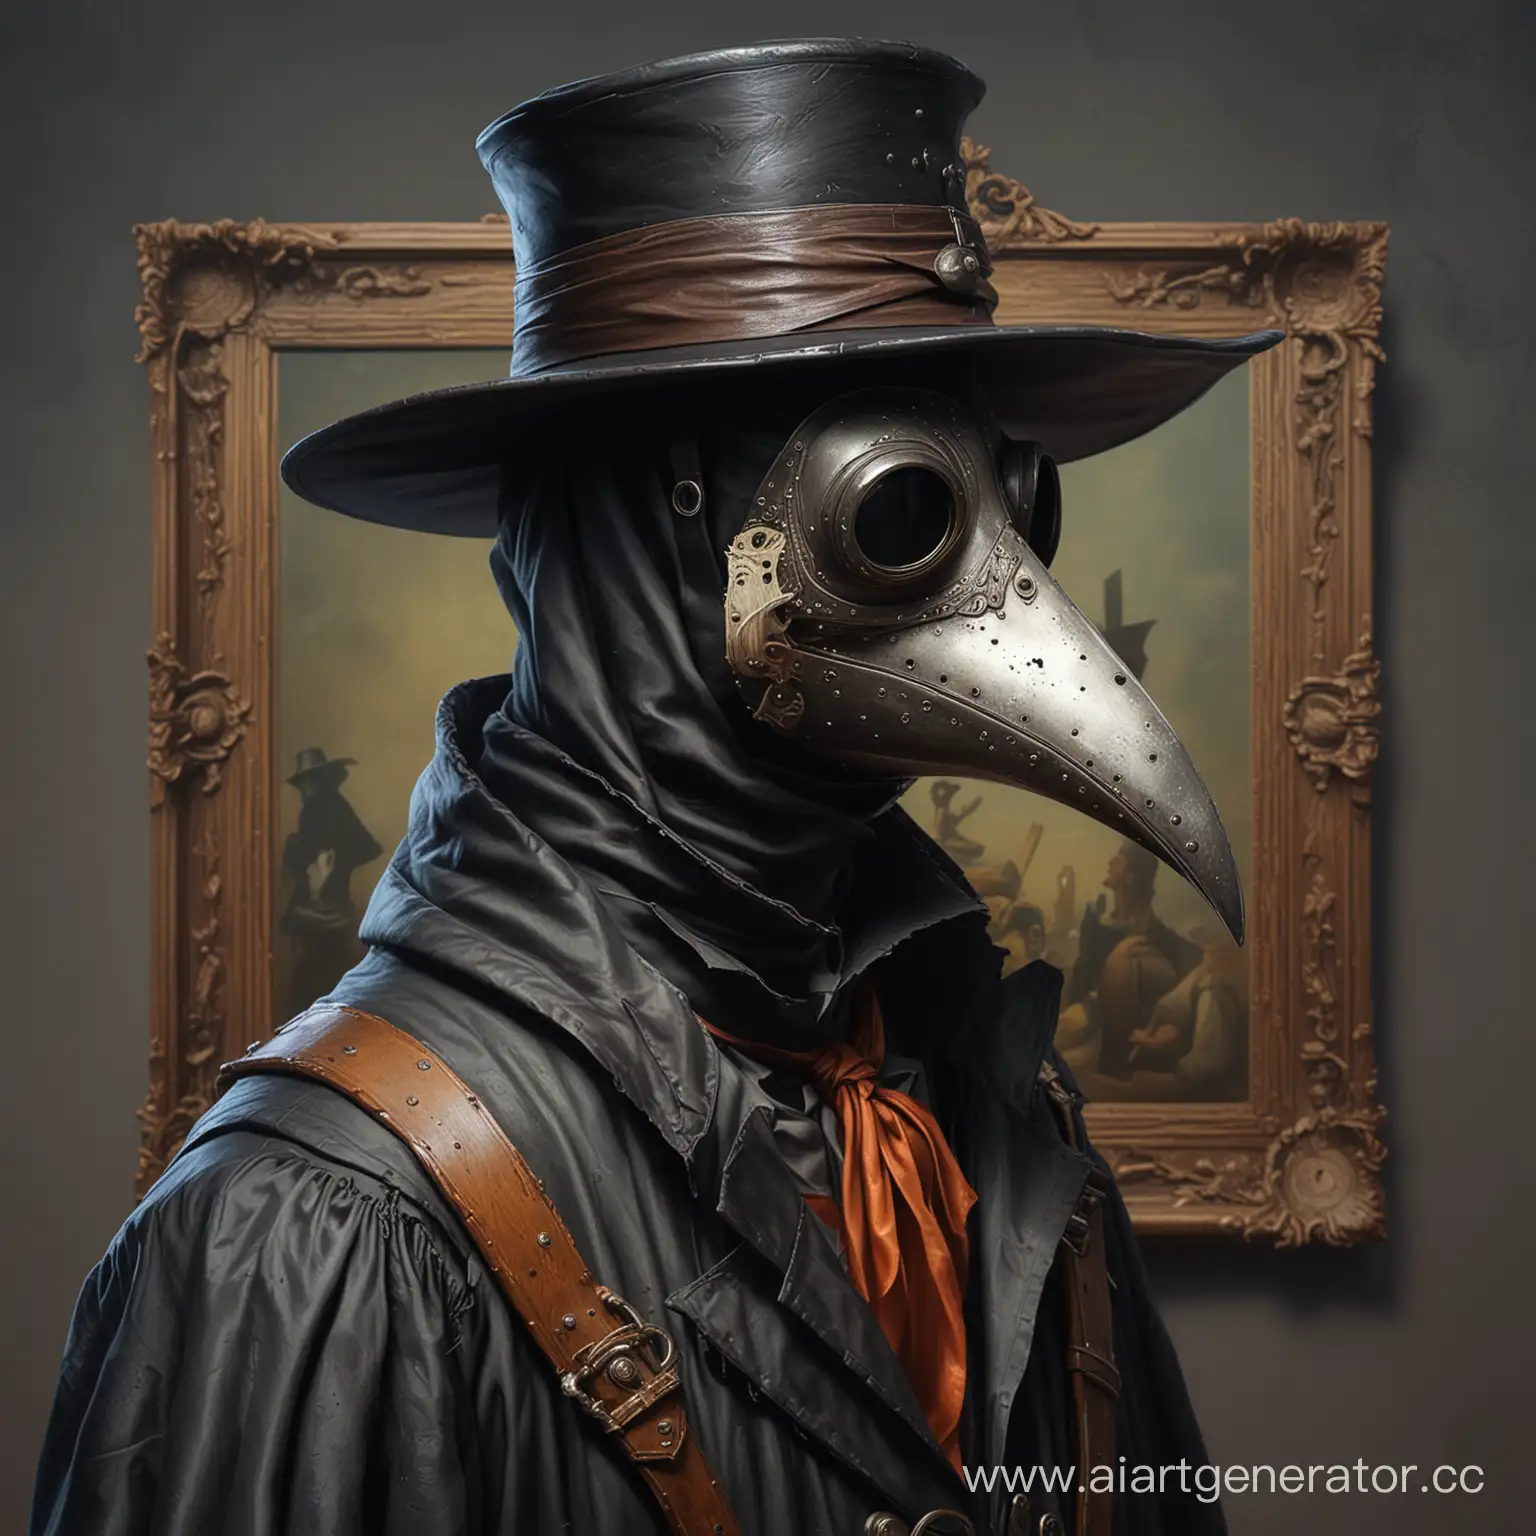 Colorful-Realism-Painting-of-a-Plague-Doctor-with-Exaggerated-Anatomy